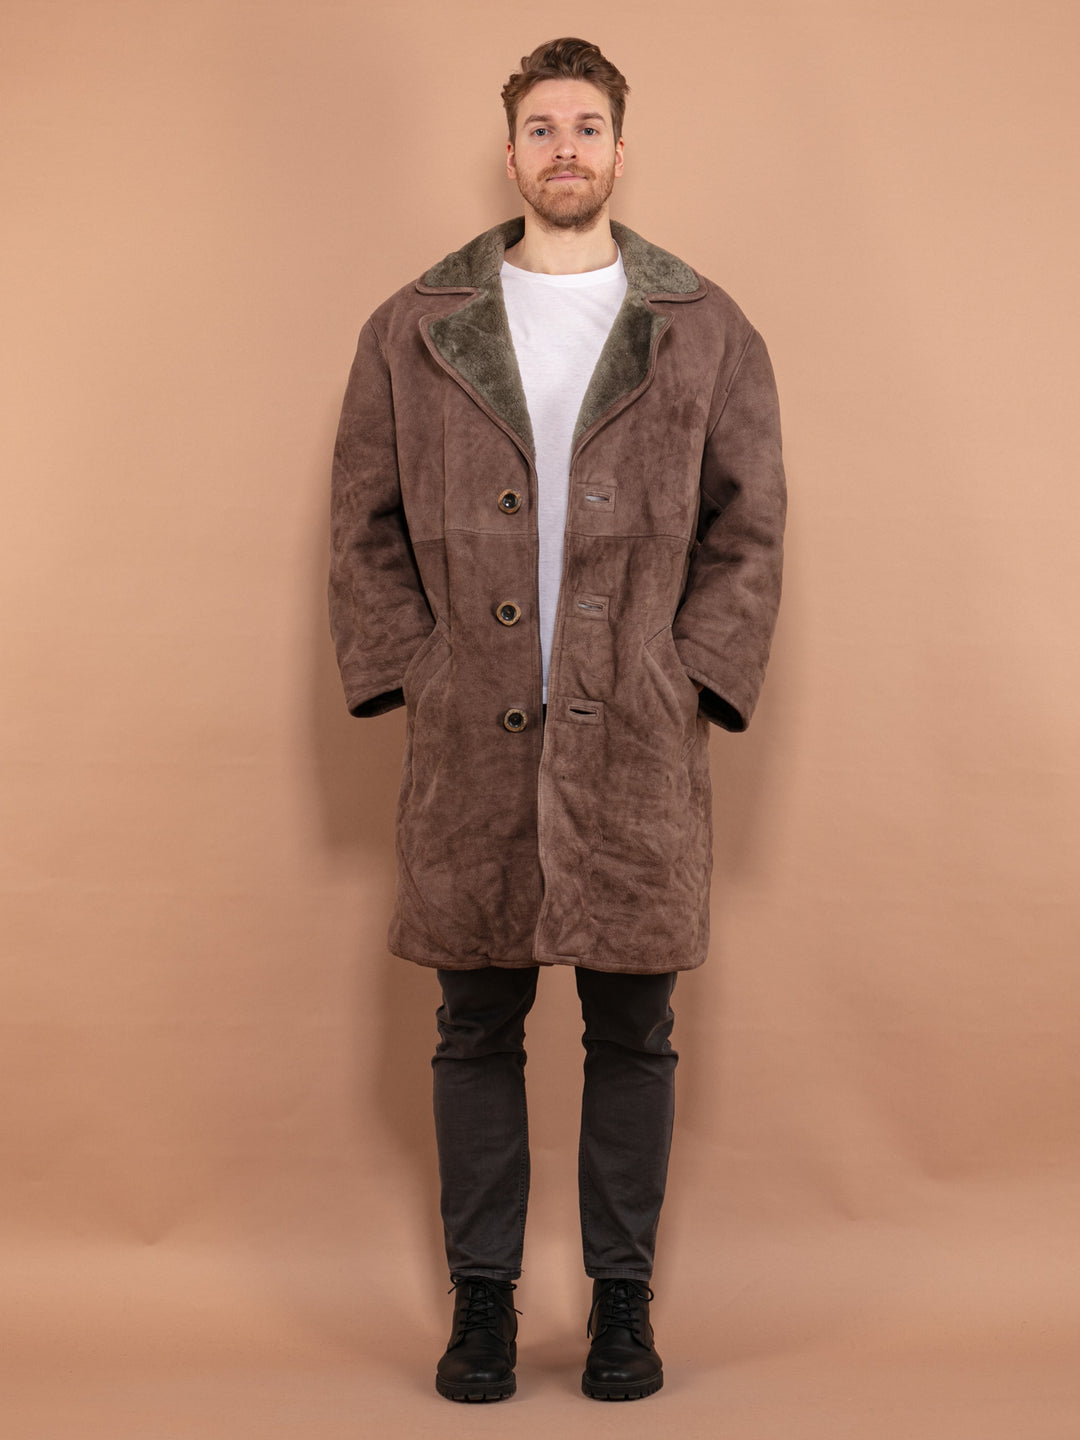 Men Sheepskin Coat 70's, Size XL, Heavy Shearling Coat, Vintage Winter Clothing, Pale Brown Suede Overcoat, Oversized Men Clothes, Outerwear